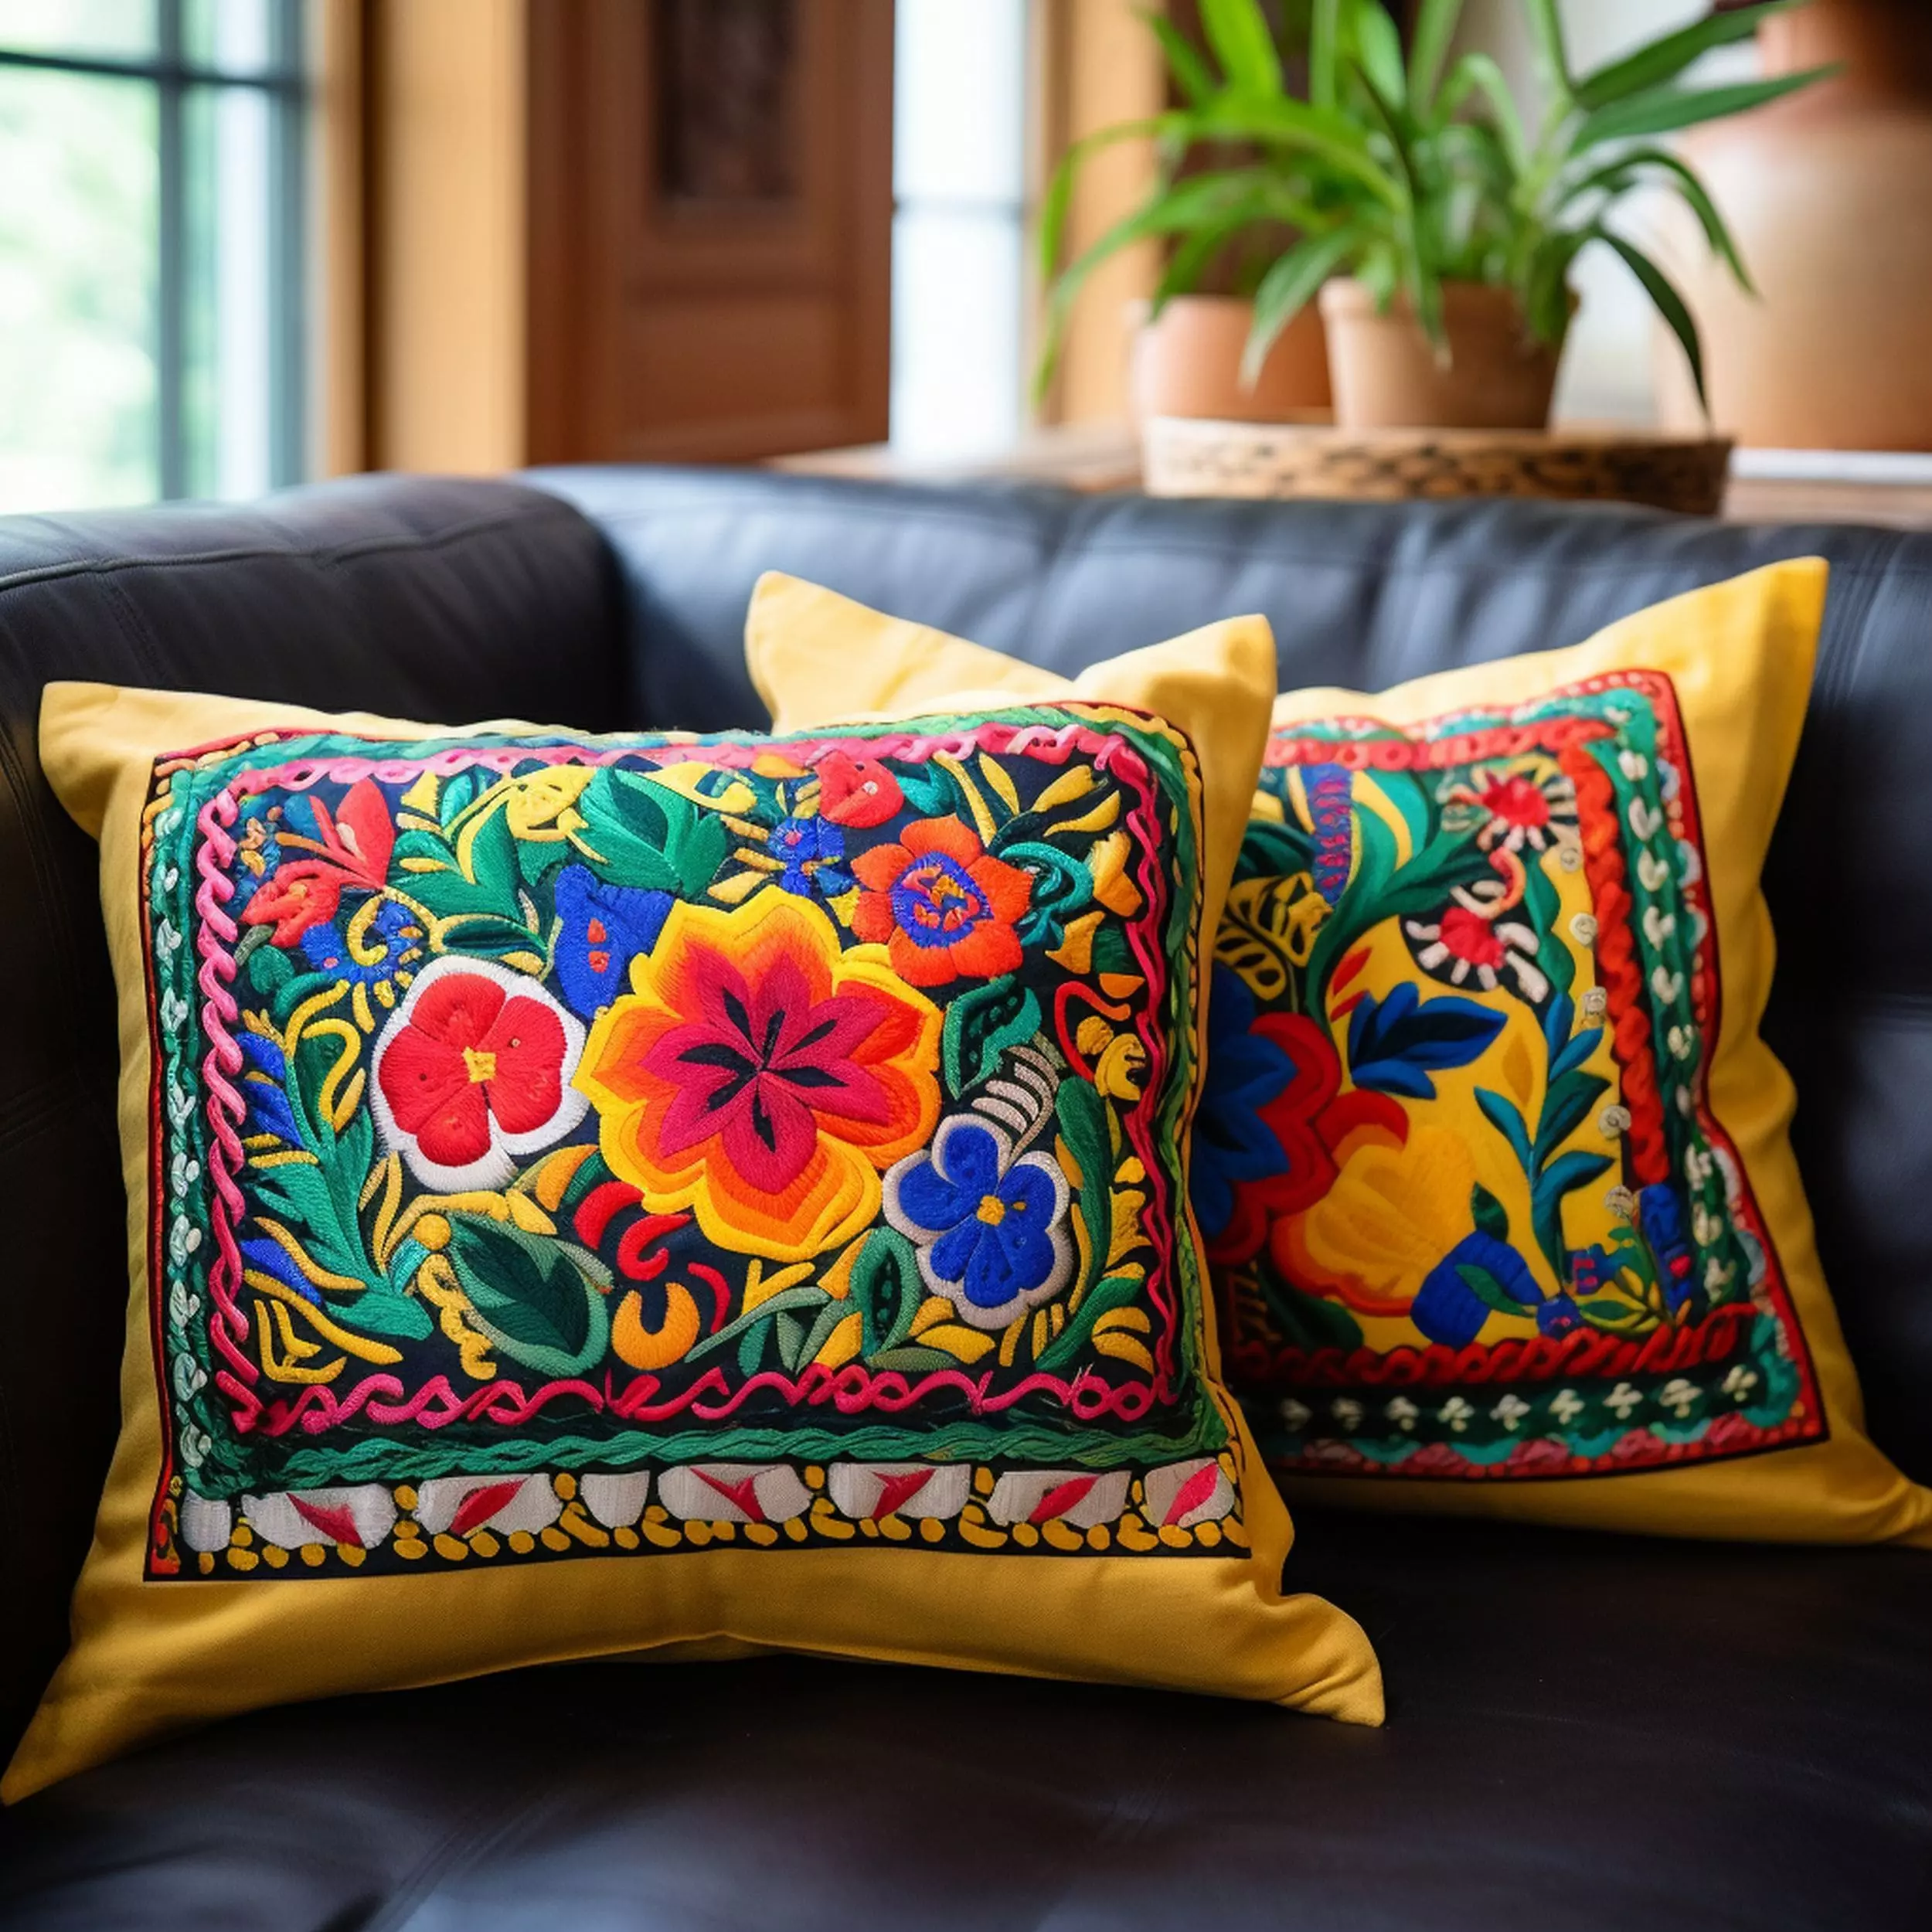 Colorful Patterned Throw Pillows